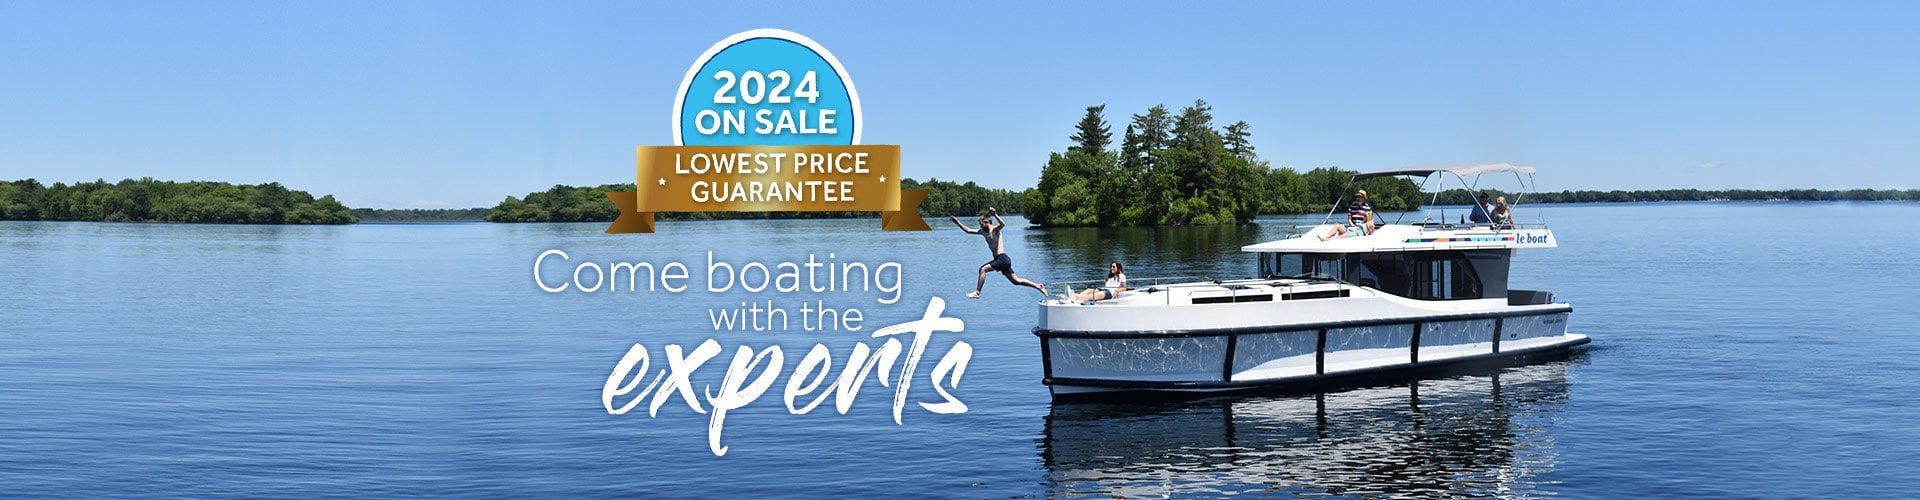 Le Boat - Save on 2024 with our Lowest Price Guarantee